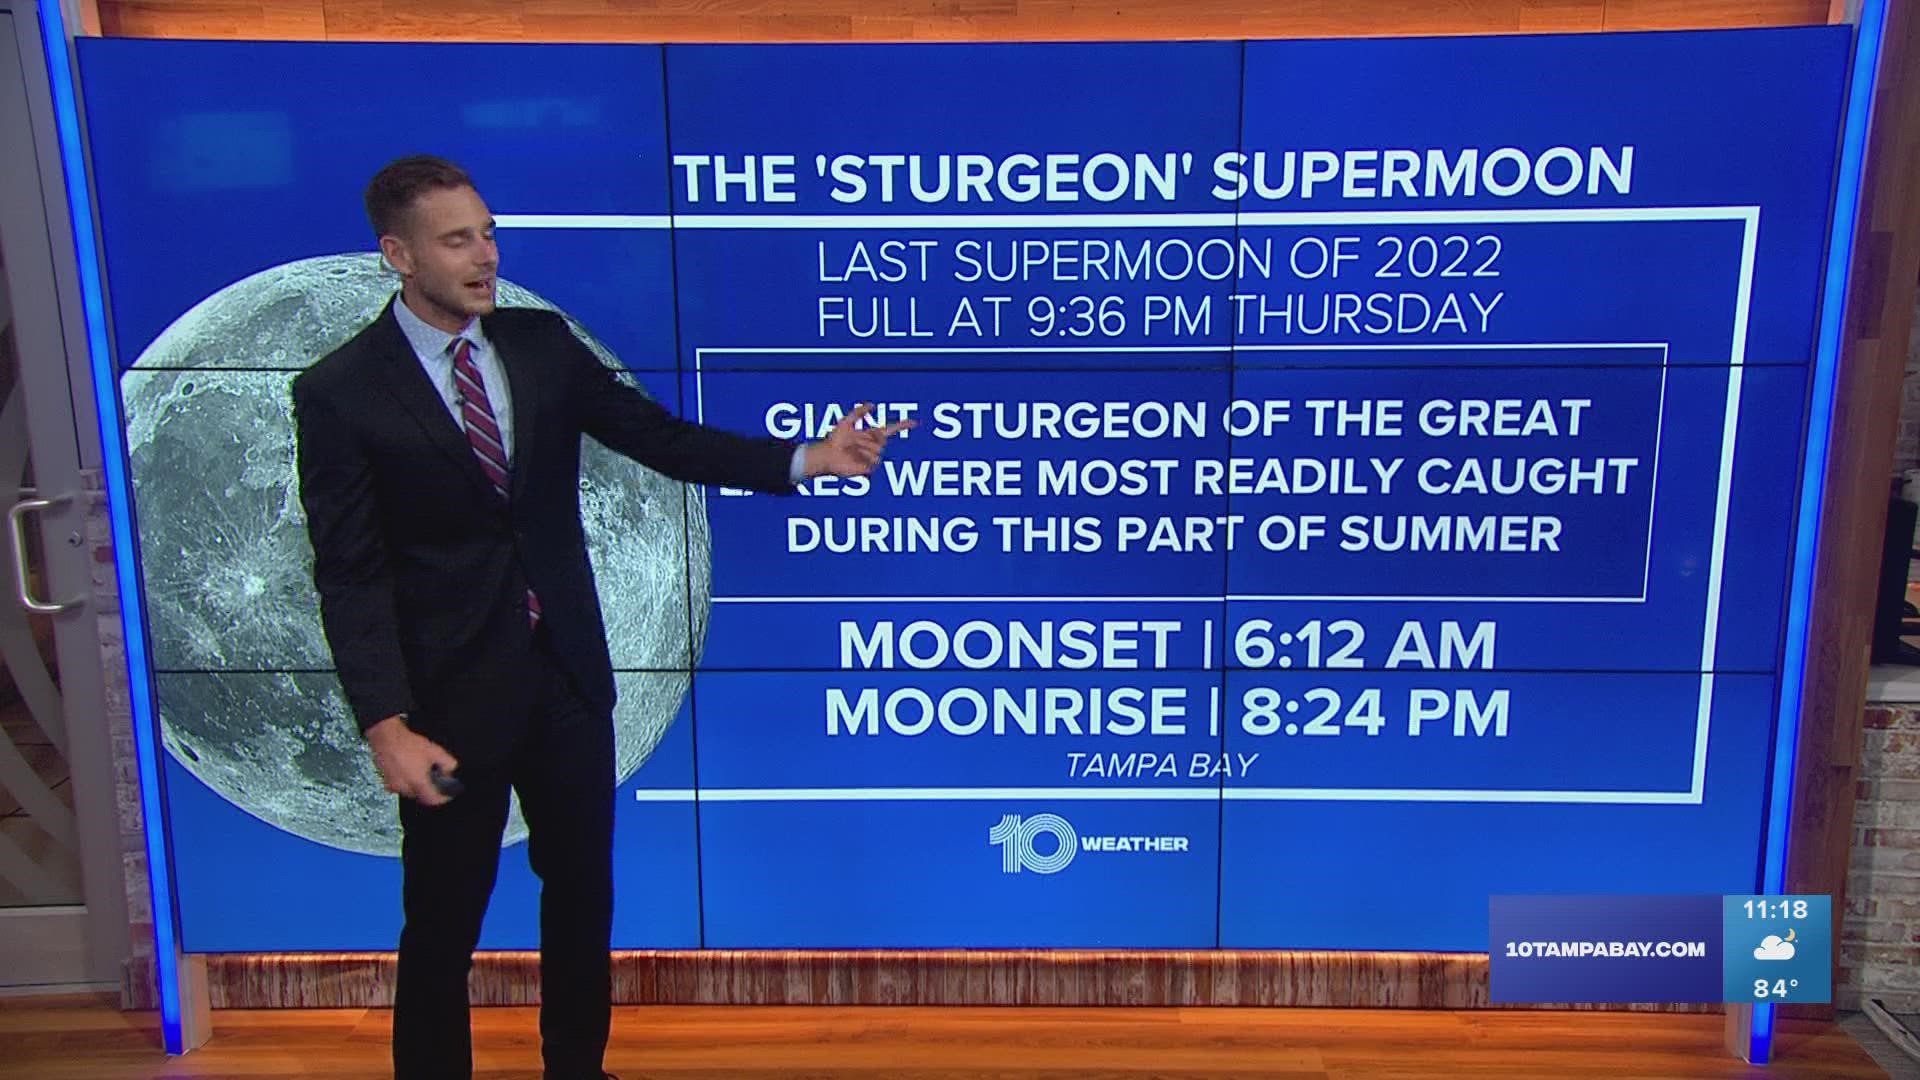 Unfortunately for the Tampa Bay area, it's a cloudy night and cloud coverage could impact your view of the supermoon.